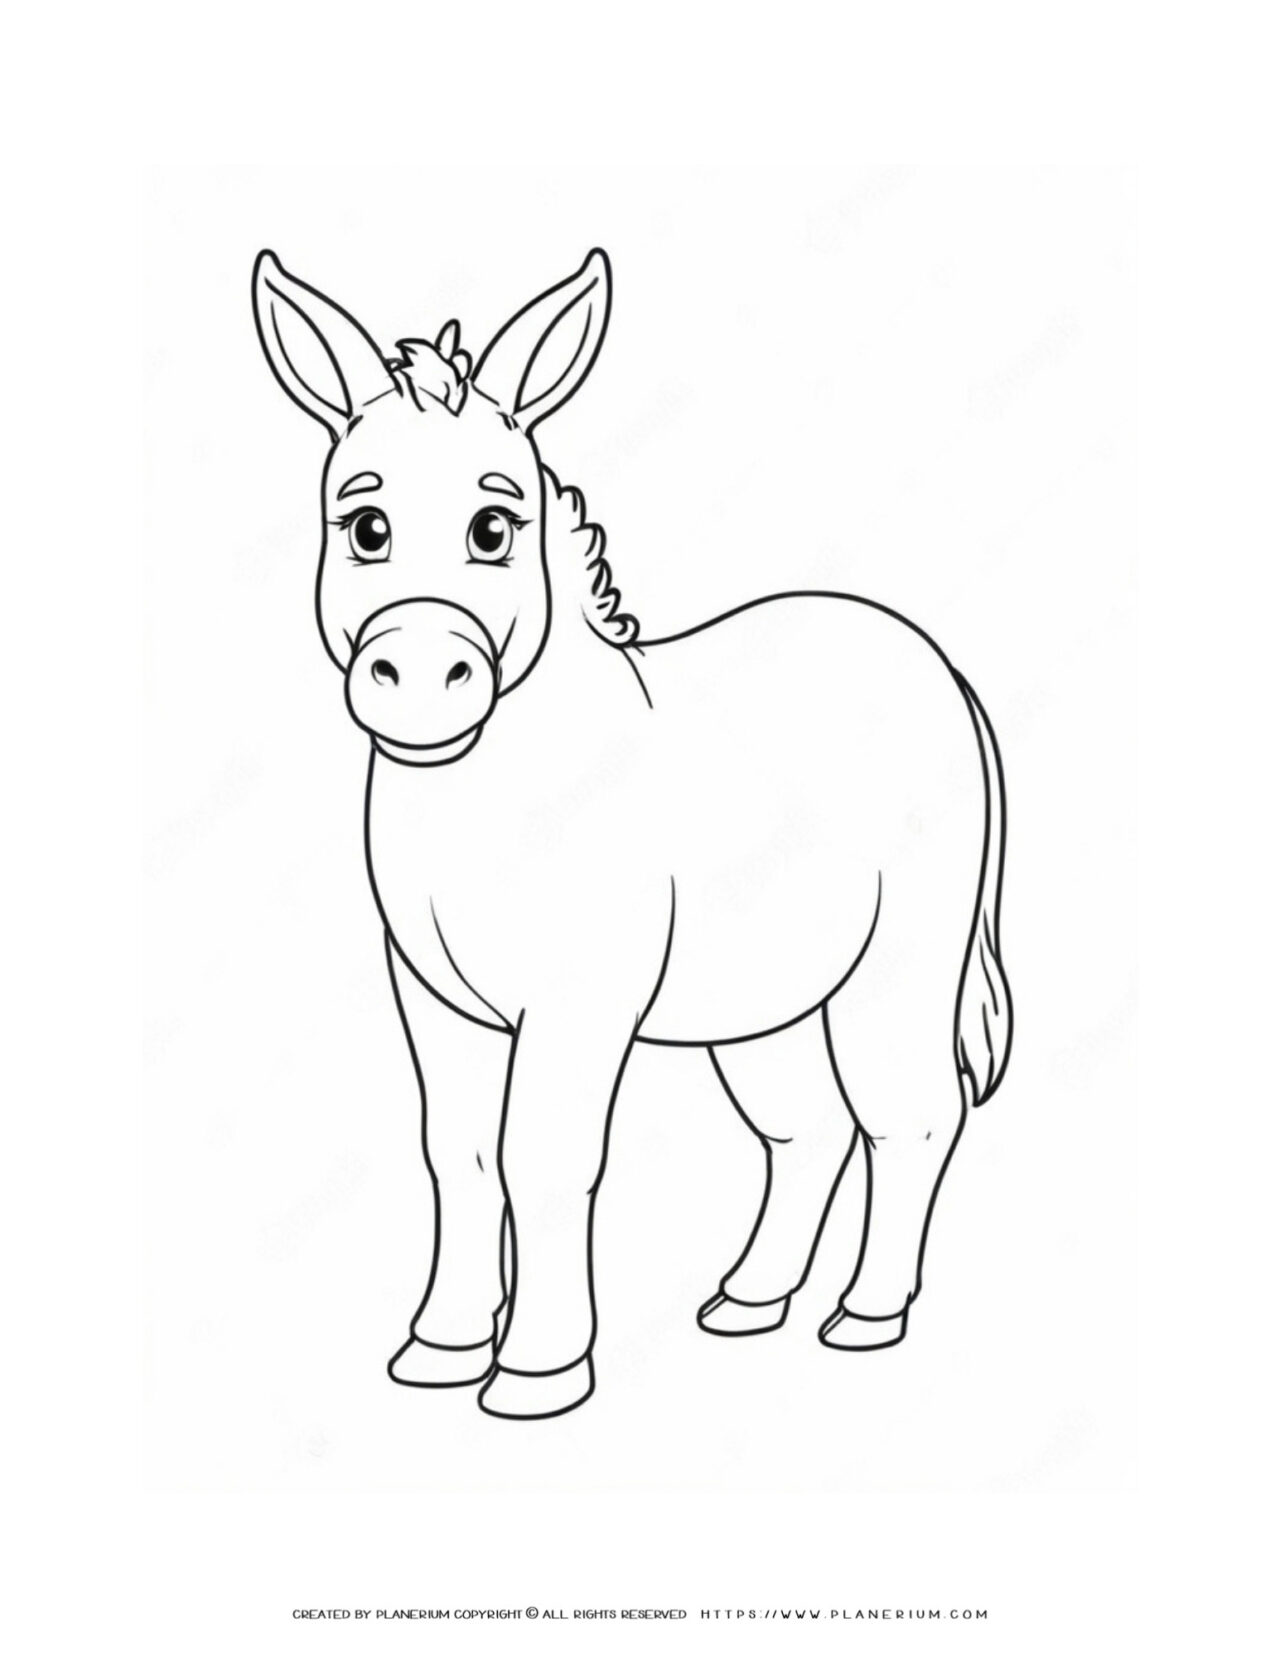 Cute-Donkey-Standing-Simple-Coloring-Page